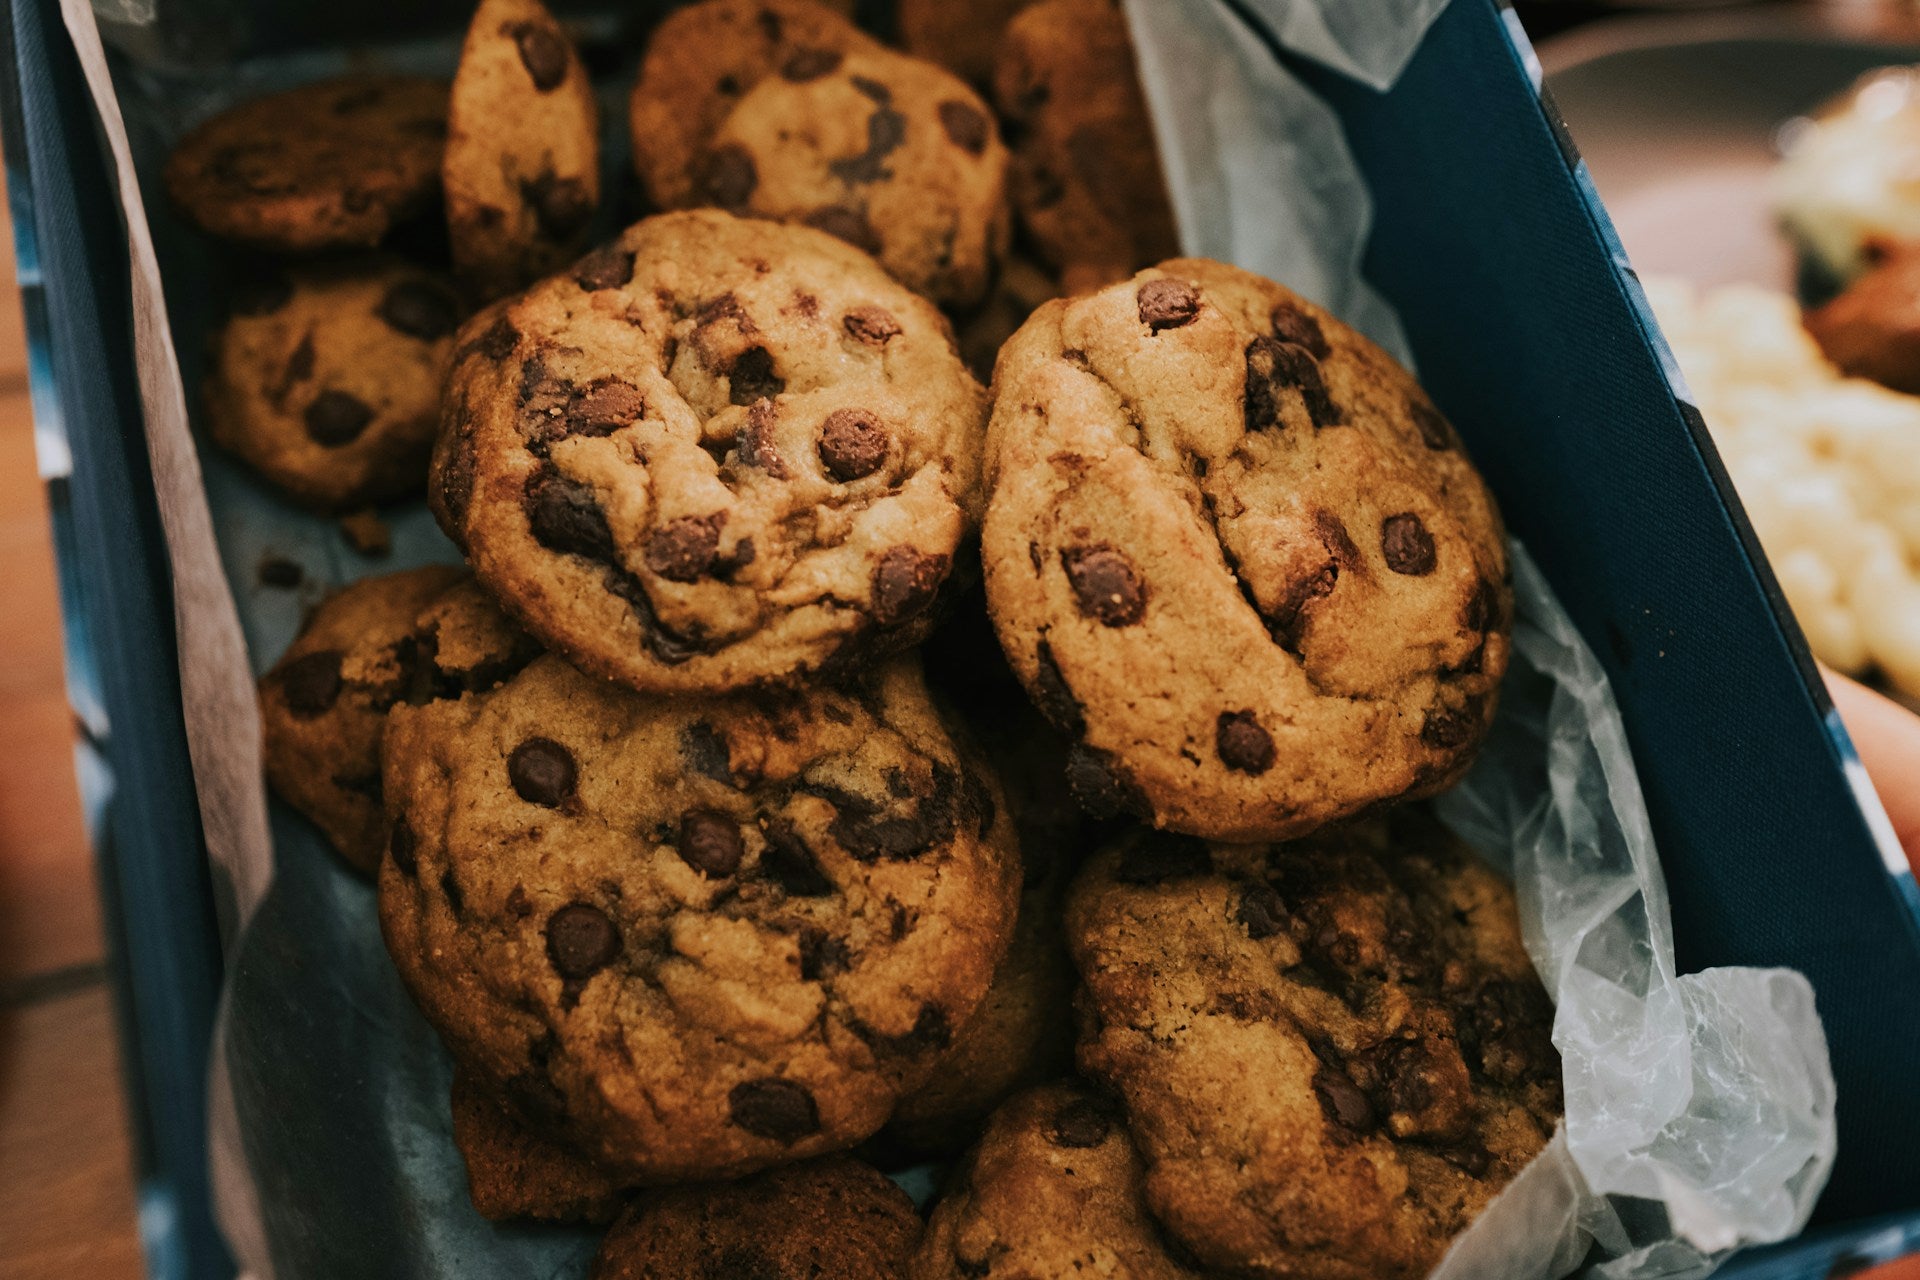 Affordable Bulk Cookies Online: Top Choices for Budget-Friendly Treats